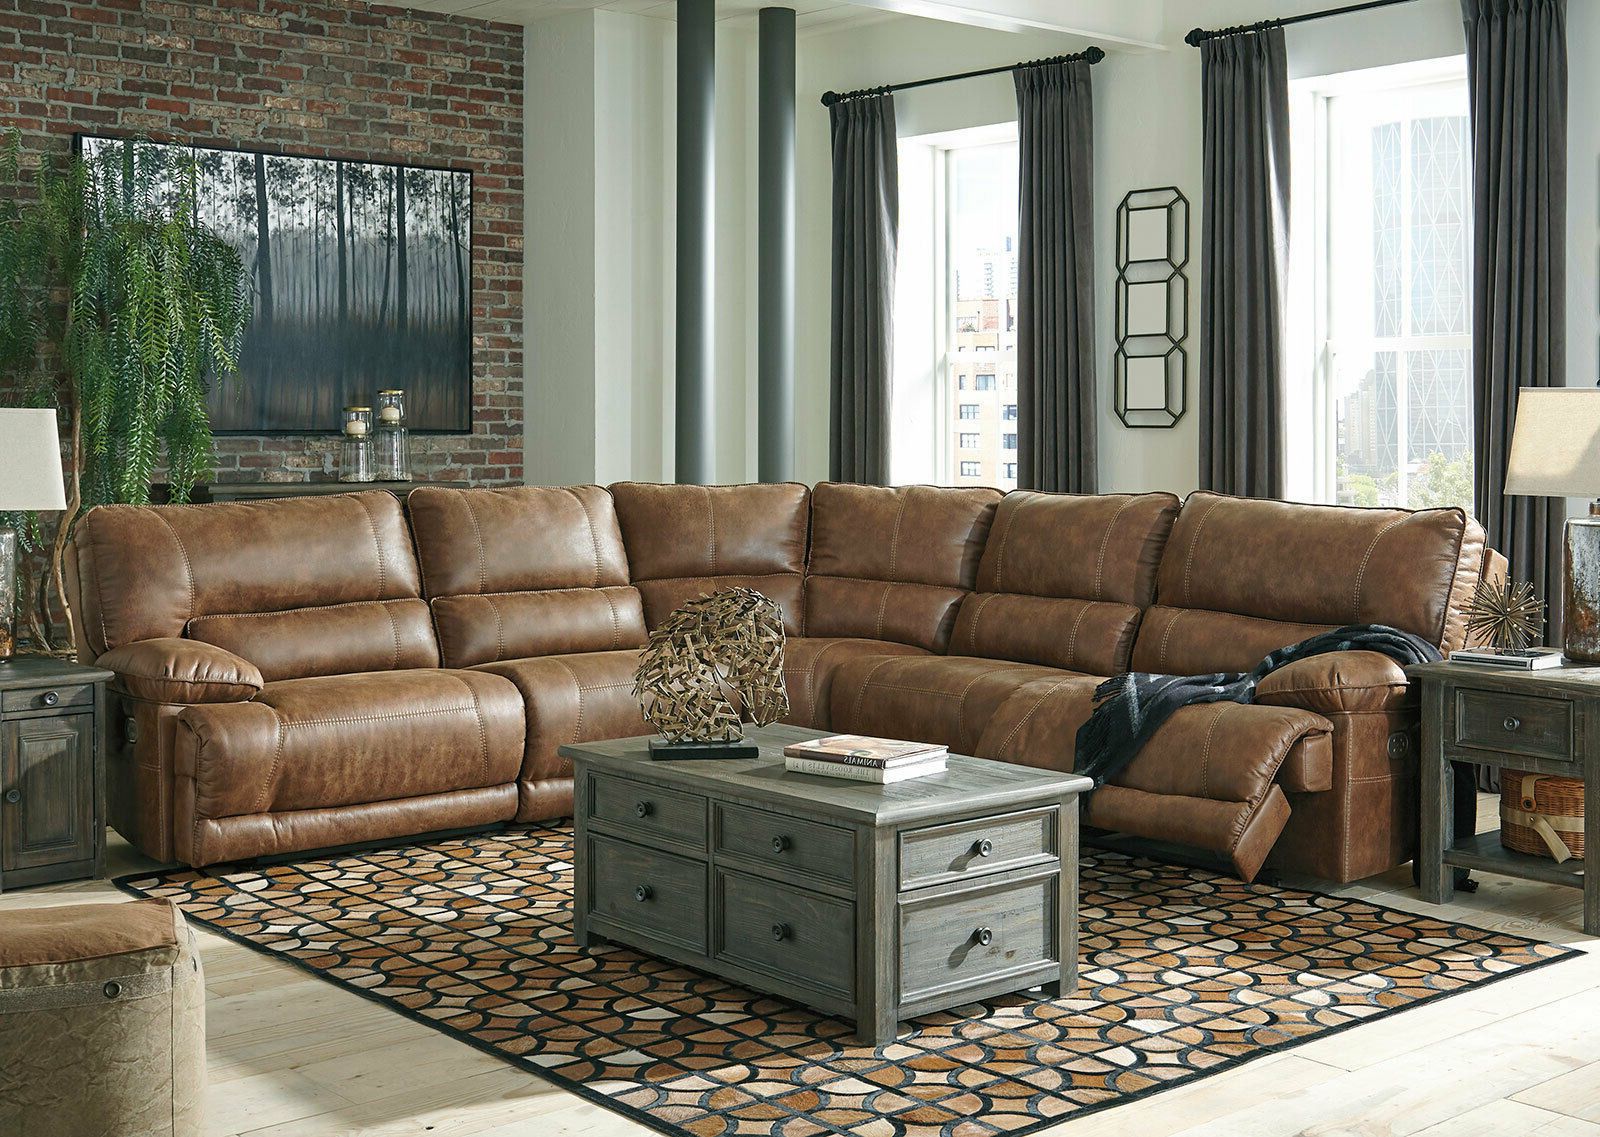 Hamburg 5pcs Sectional Living Room Brown Faux Leather Power Reclining Intended For Faux Leather Sofas In Dark Brown (View 14 of 20)